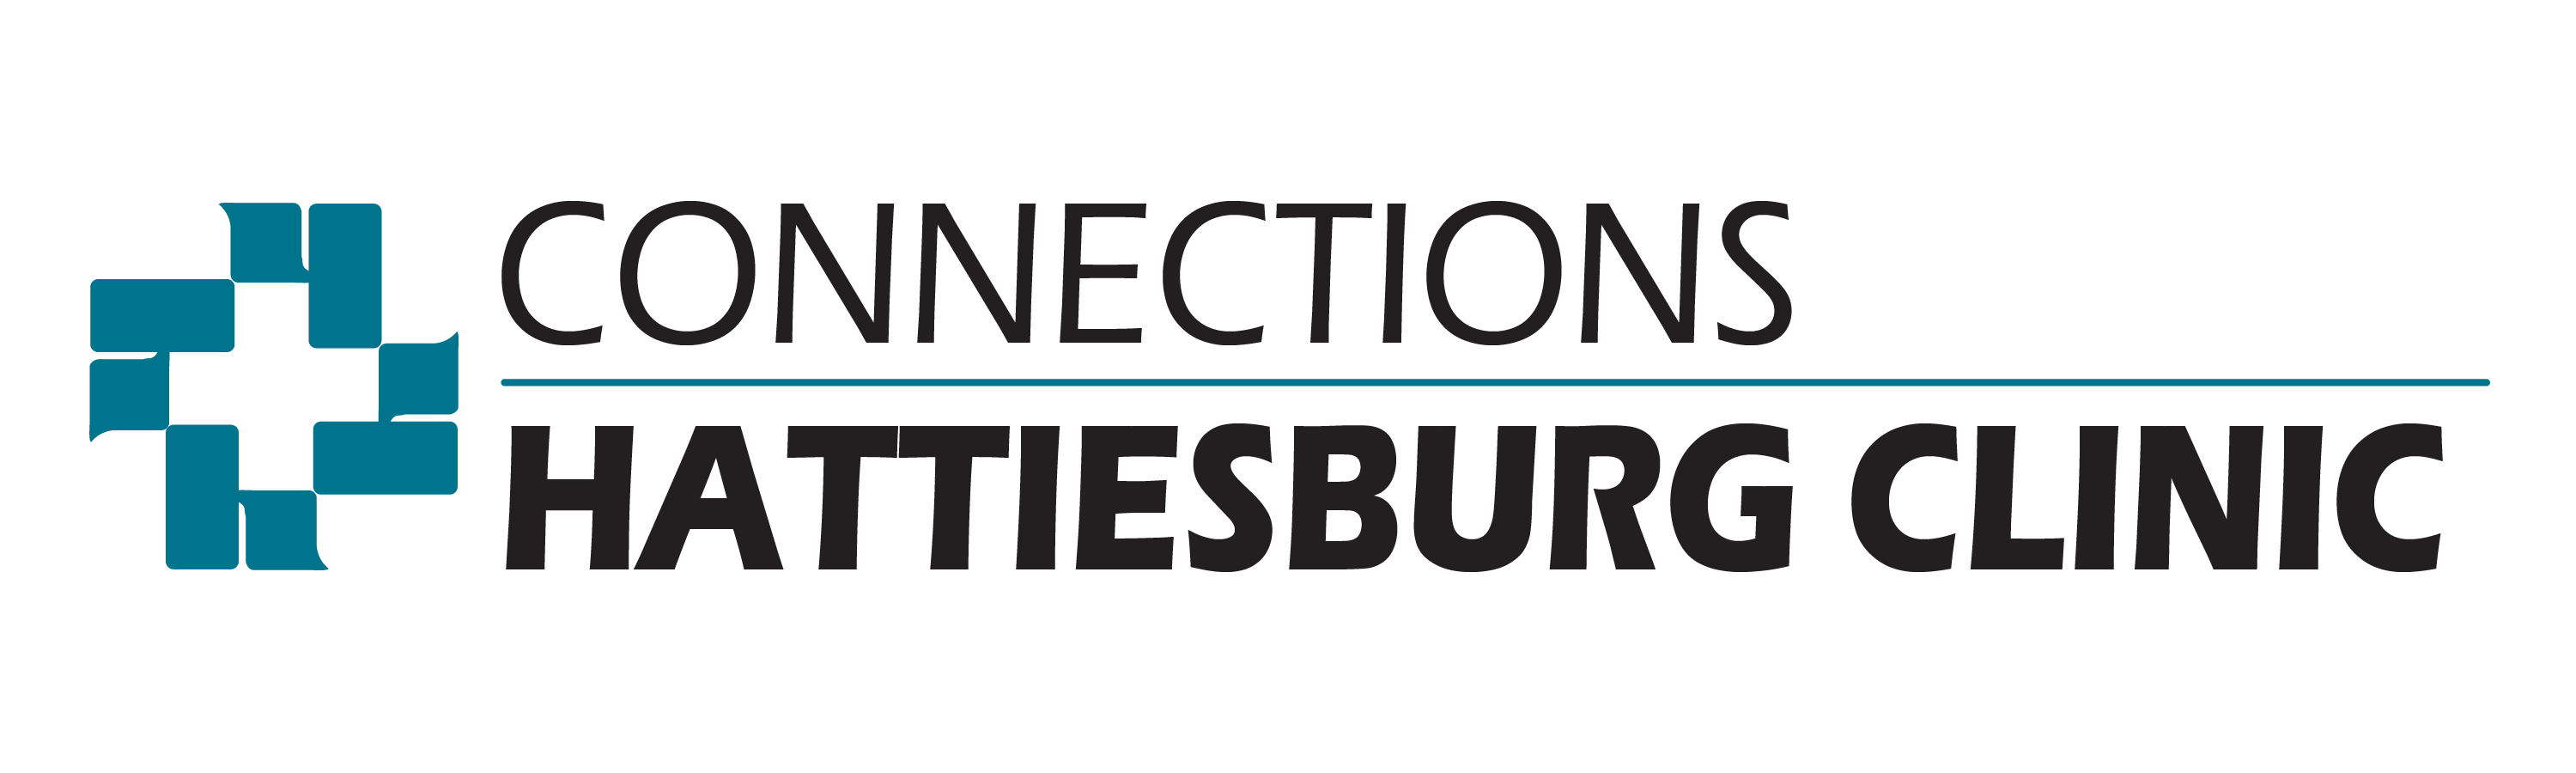 Hattiesburg Clinic Connections logo